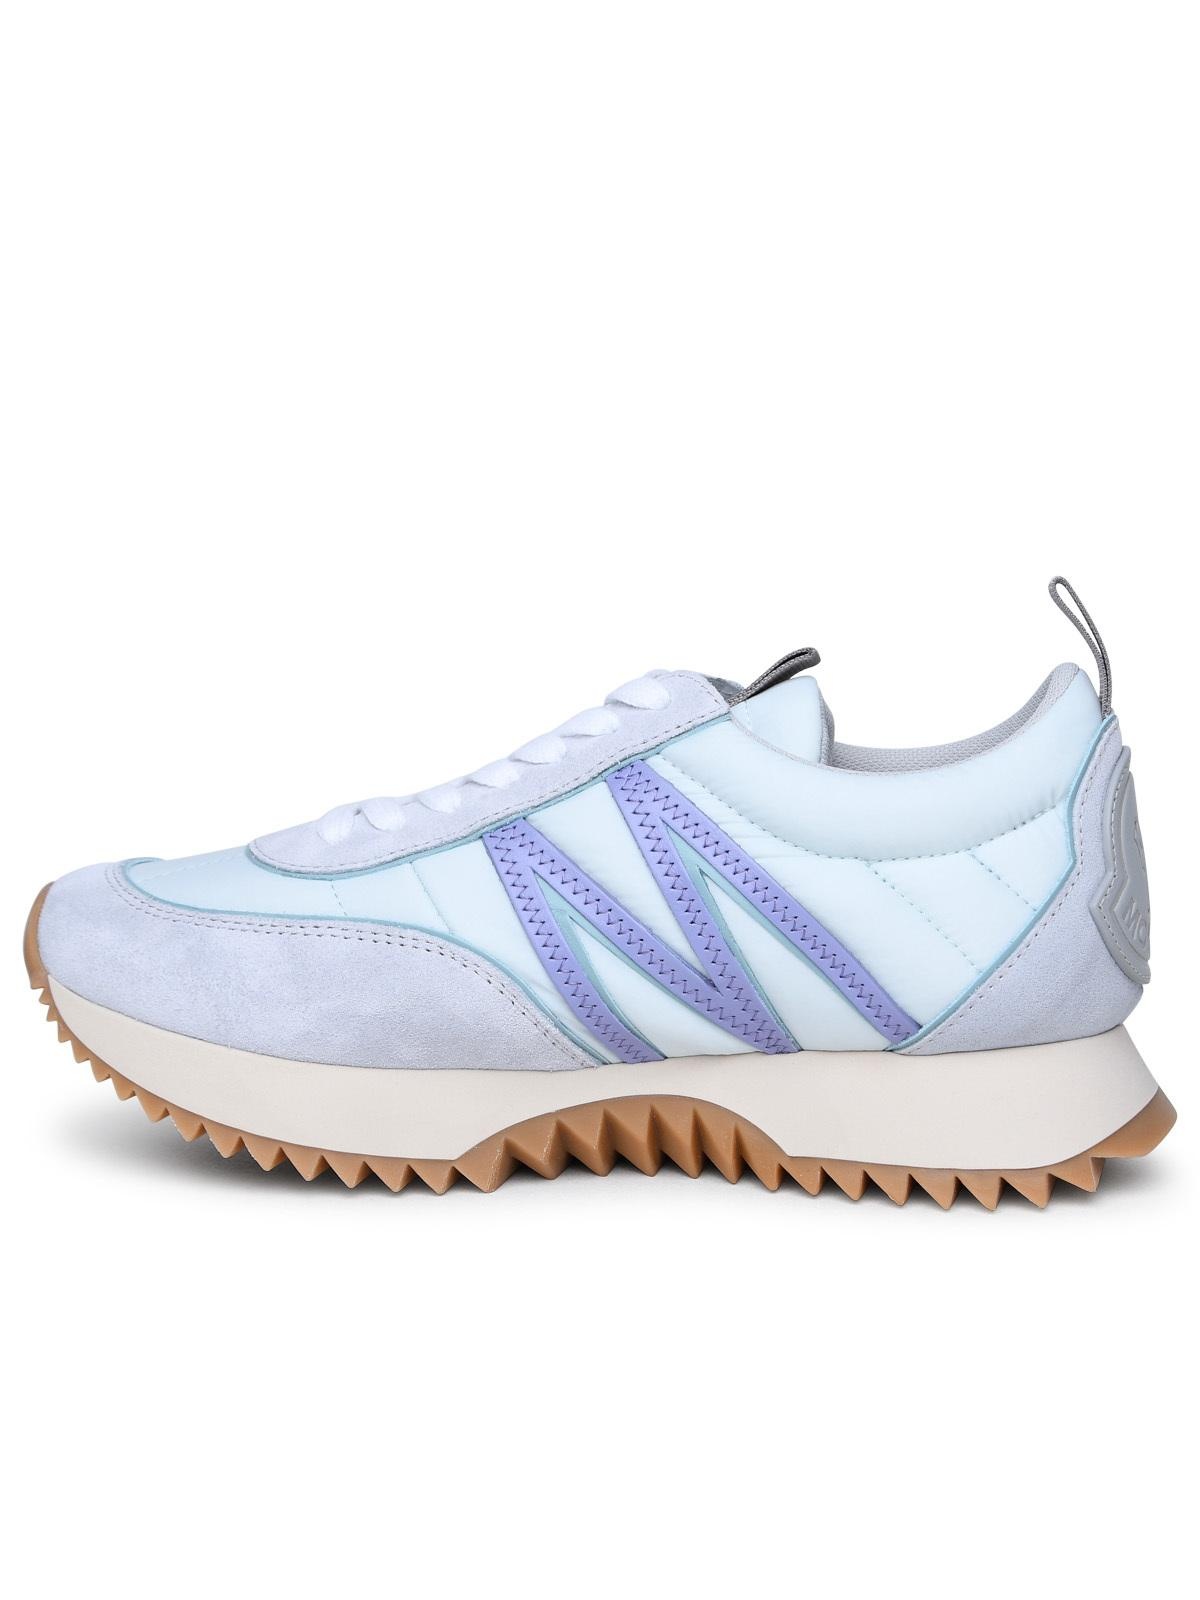 Moncler Woman Moncler 'Pacey' Sneakers In Light Blue Polyamide - 3